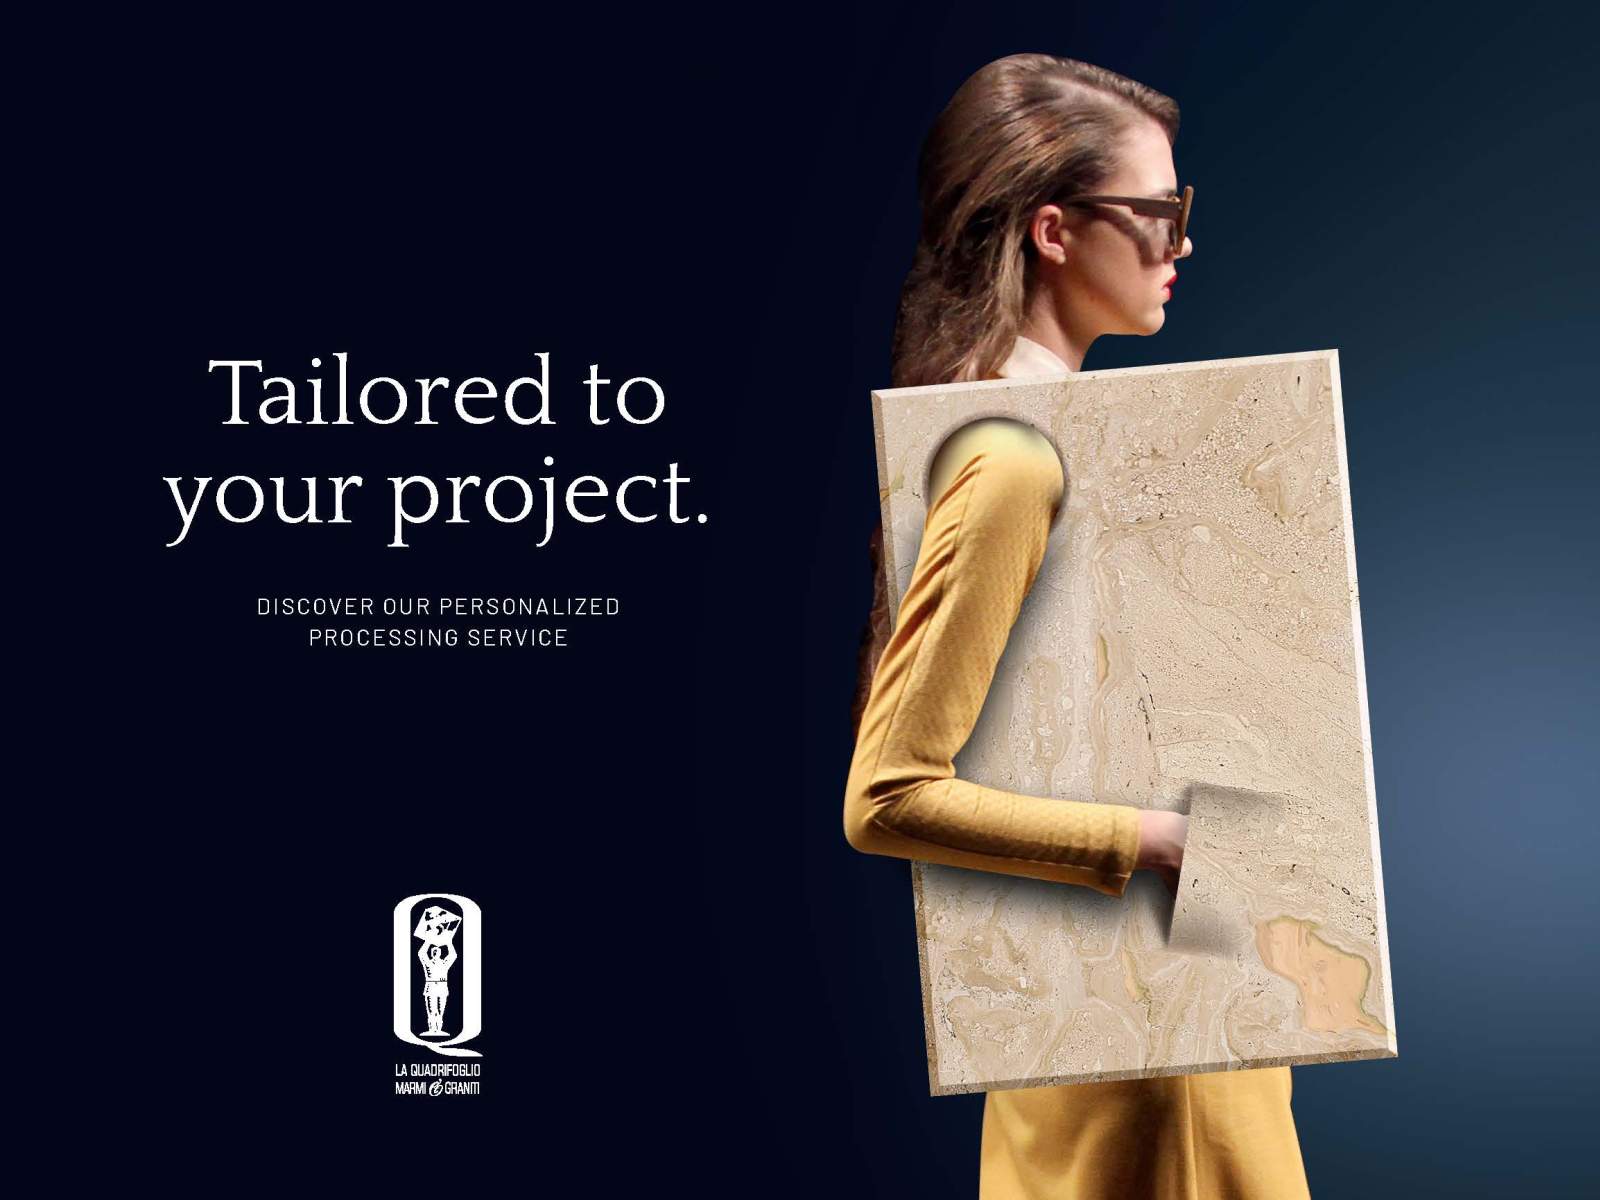 Tailored to your project.